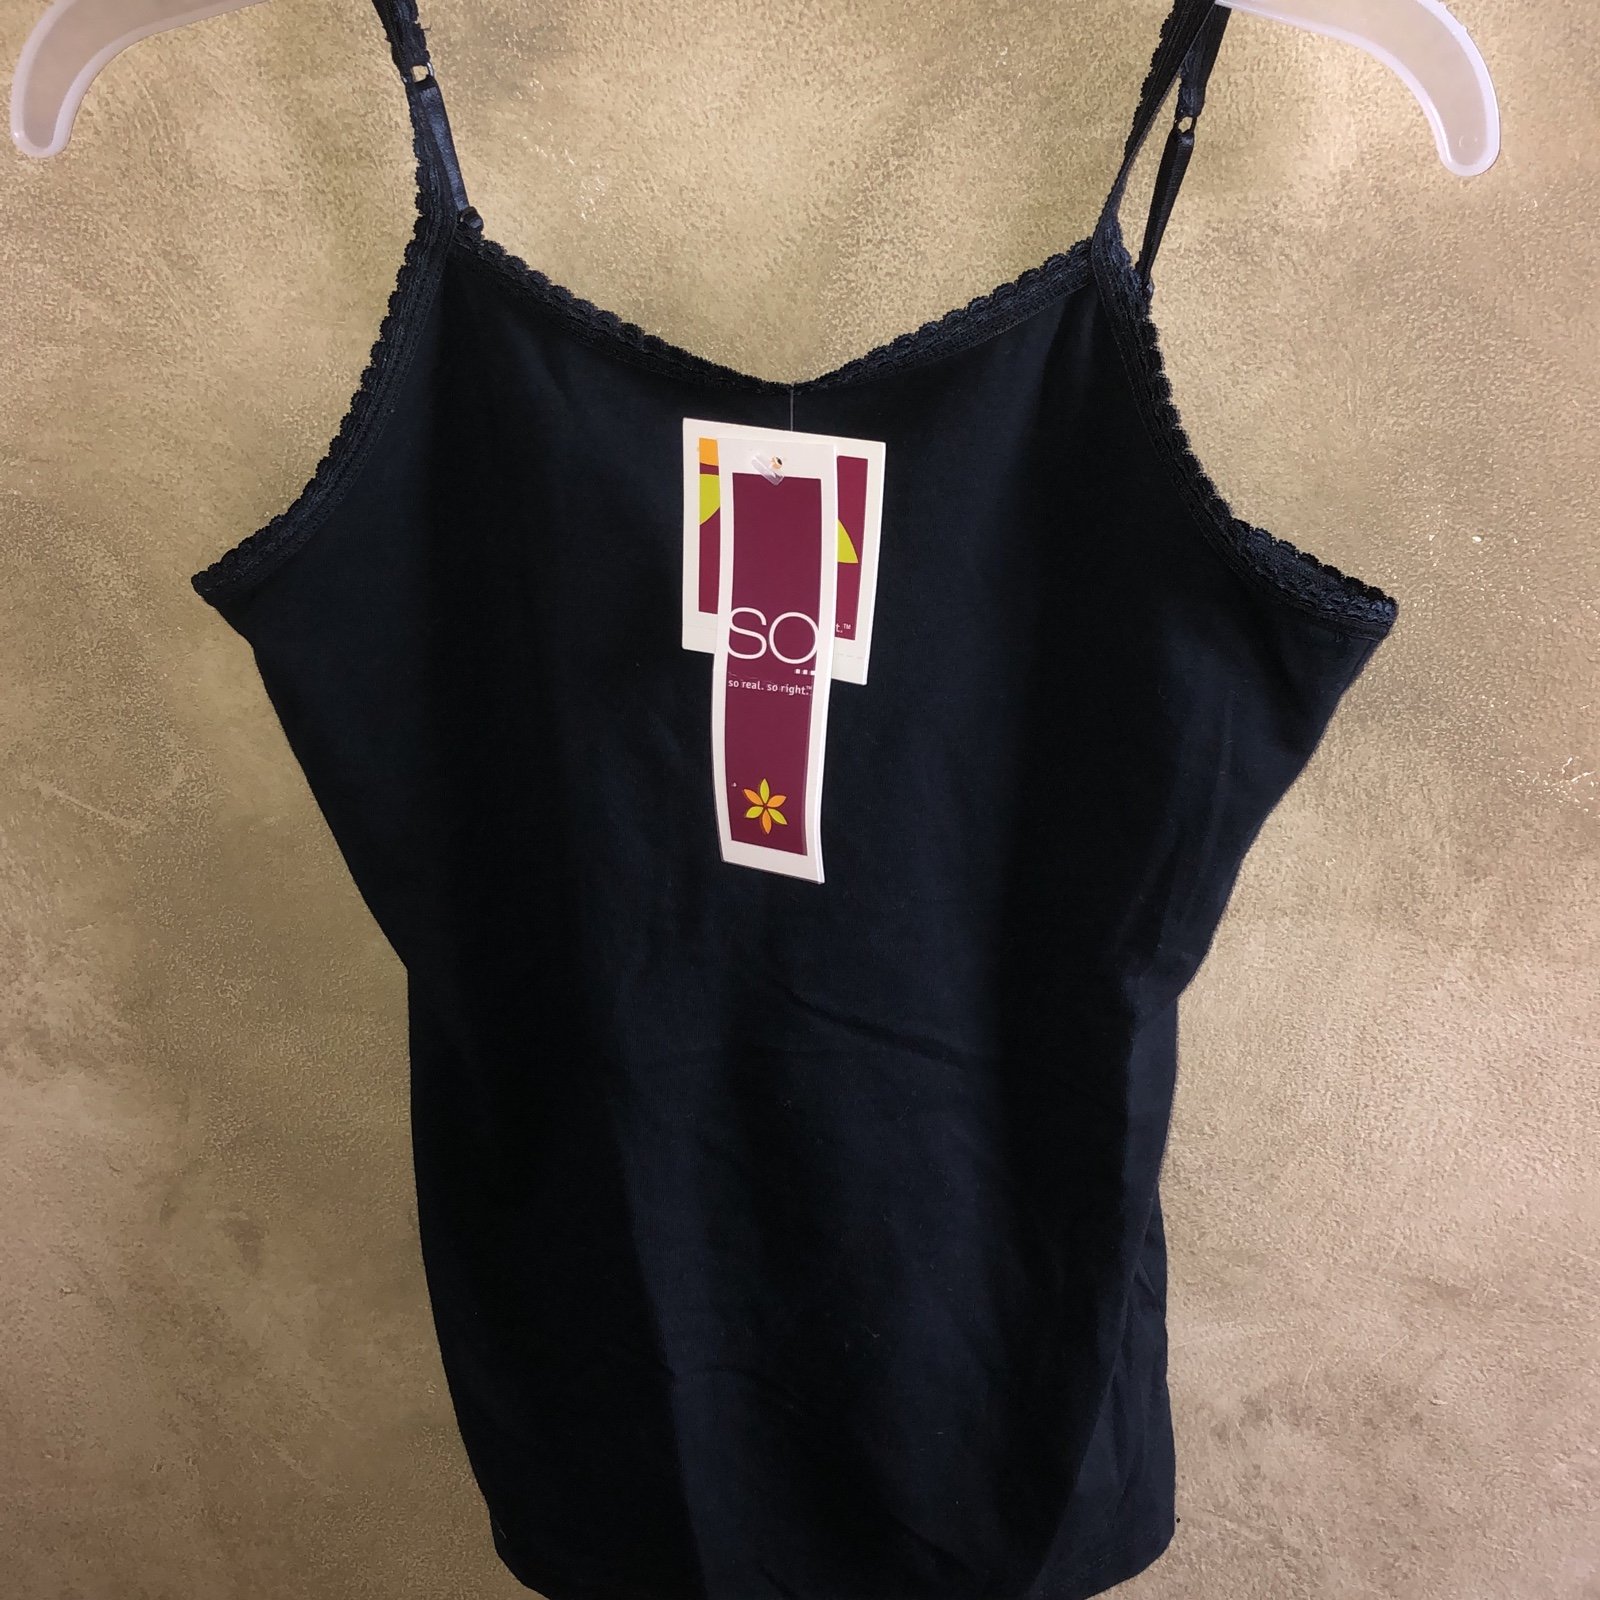 cheapest place to buy  Girls Black tank top size M NWT nihDp2It5 Wholesale